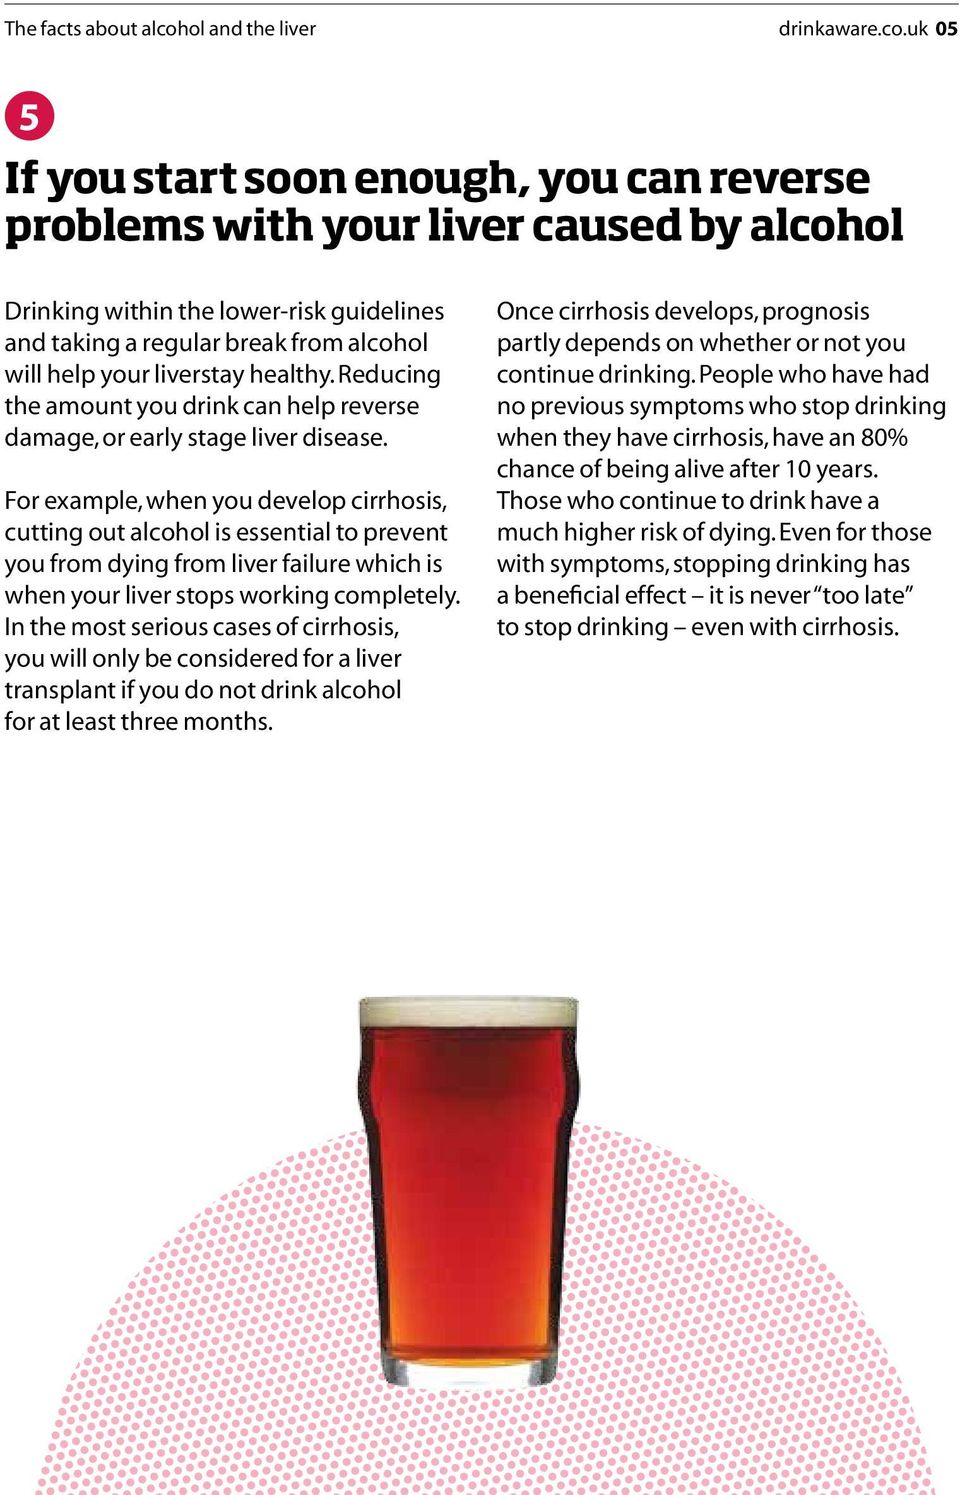 healthy. Reducing the amount you drink can help reverse damage, or early stage liver disease.